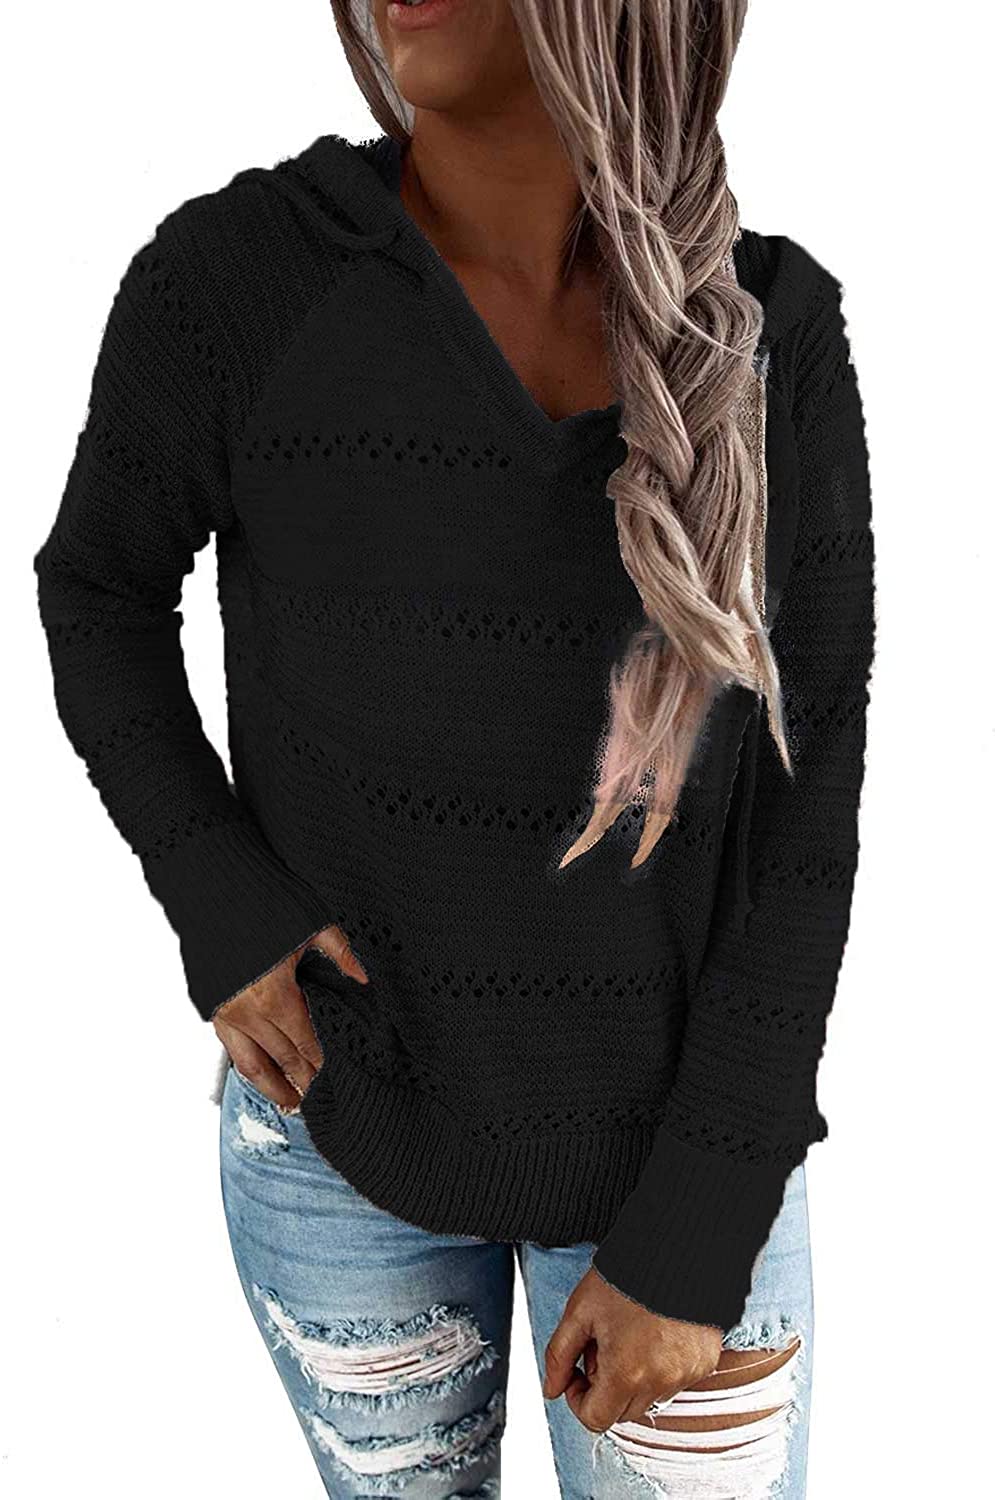 ANFTFH Casual Sweater V-Neck Colorful Stripe Hoodies Hollow Out Loose Pullover for Women